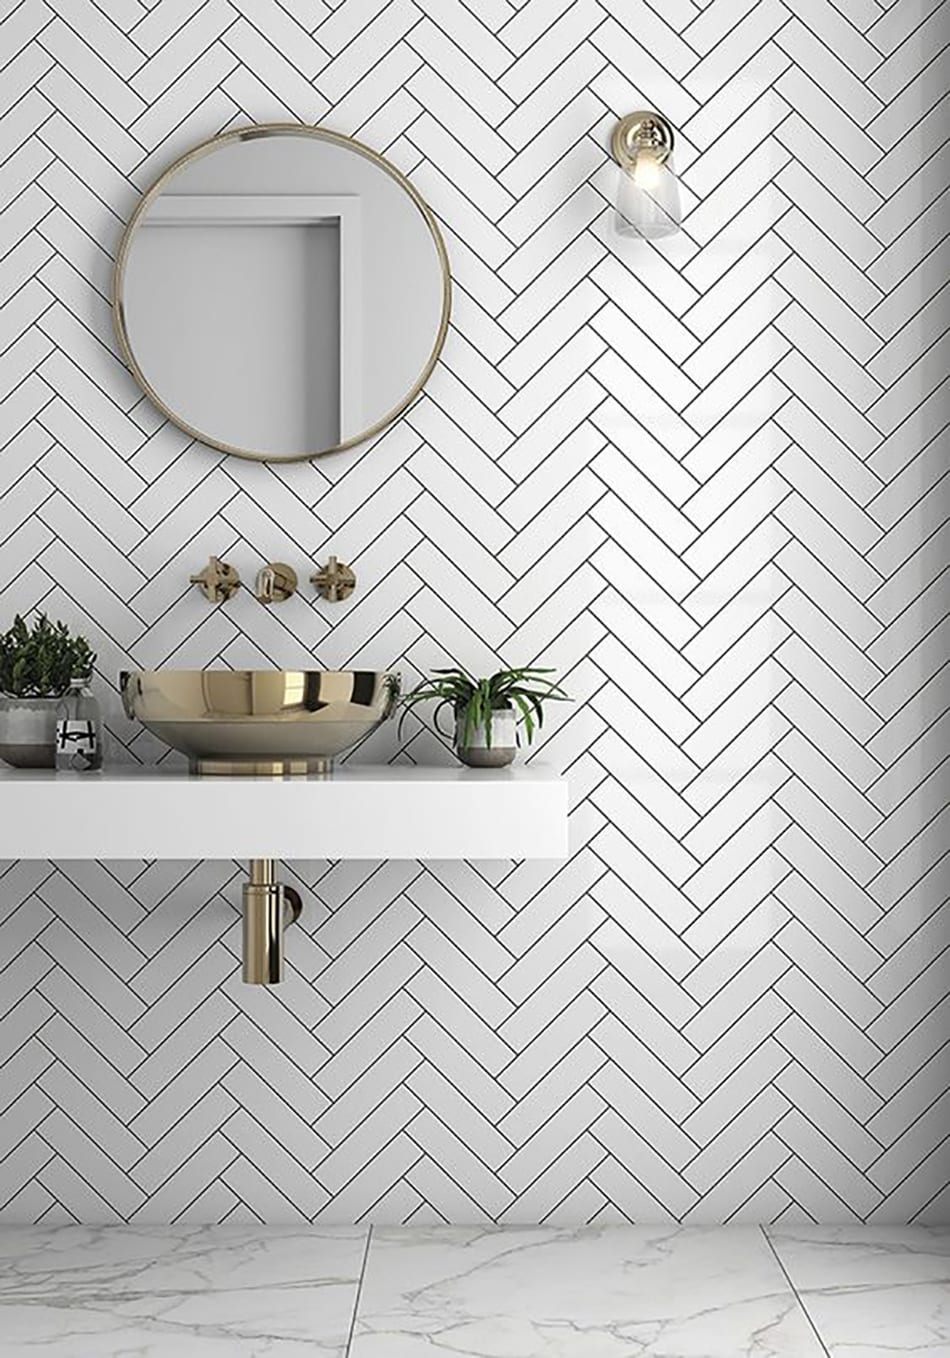 Chevron pattern 1 Top 10 Outdated Bathroom Design Trends to Avoid - 10